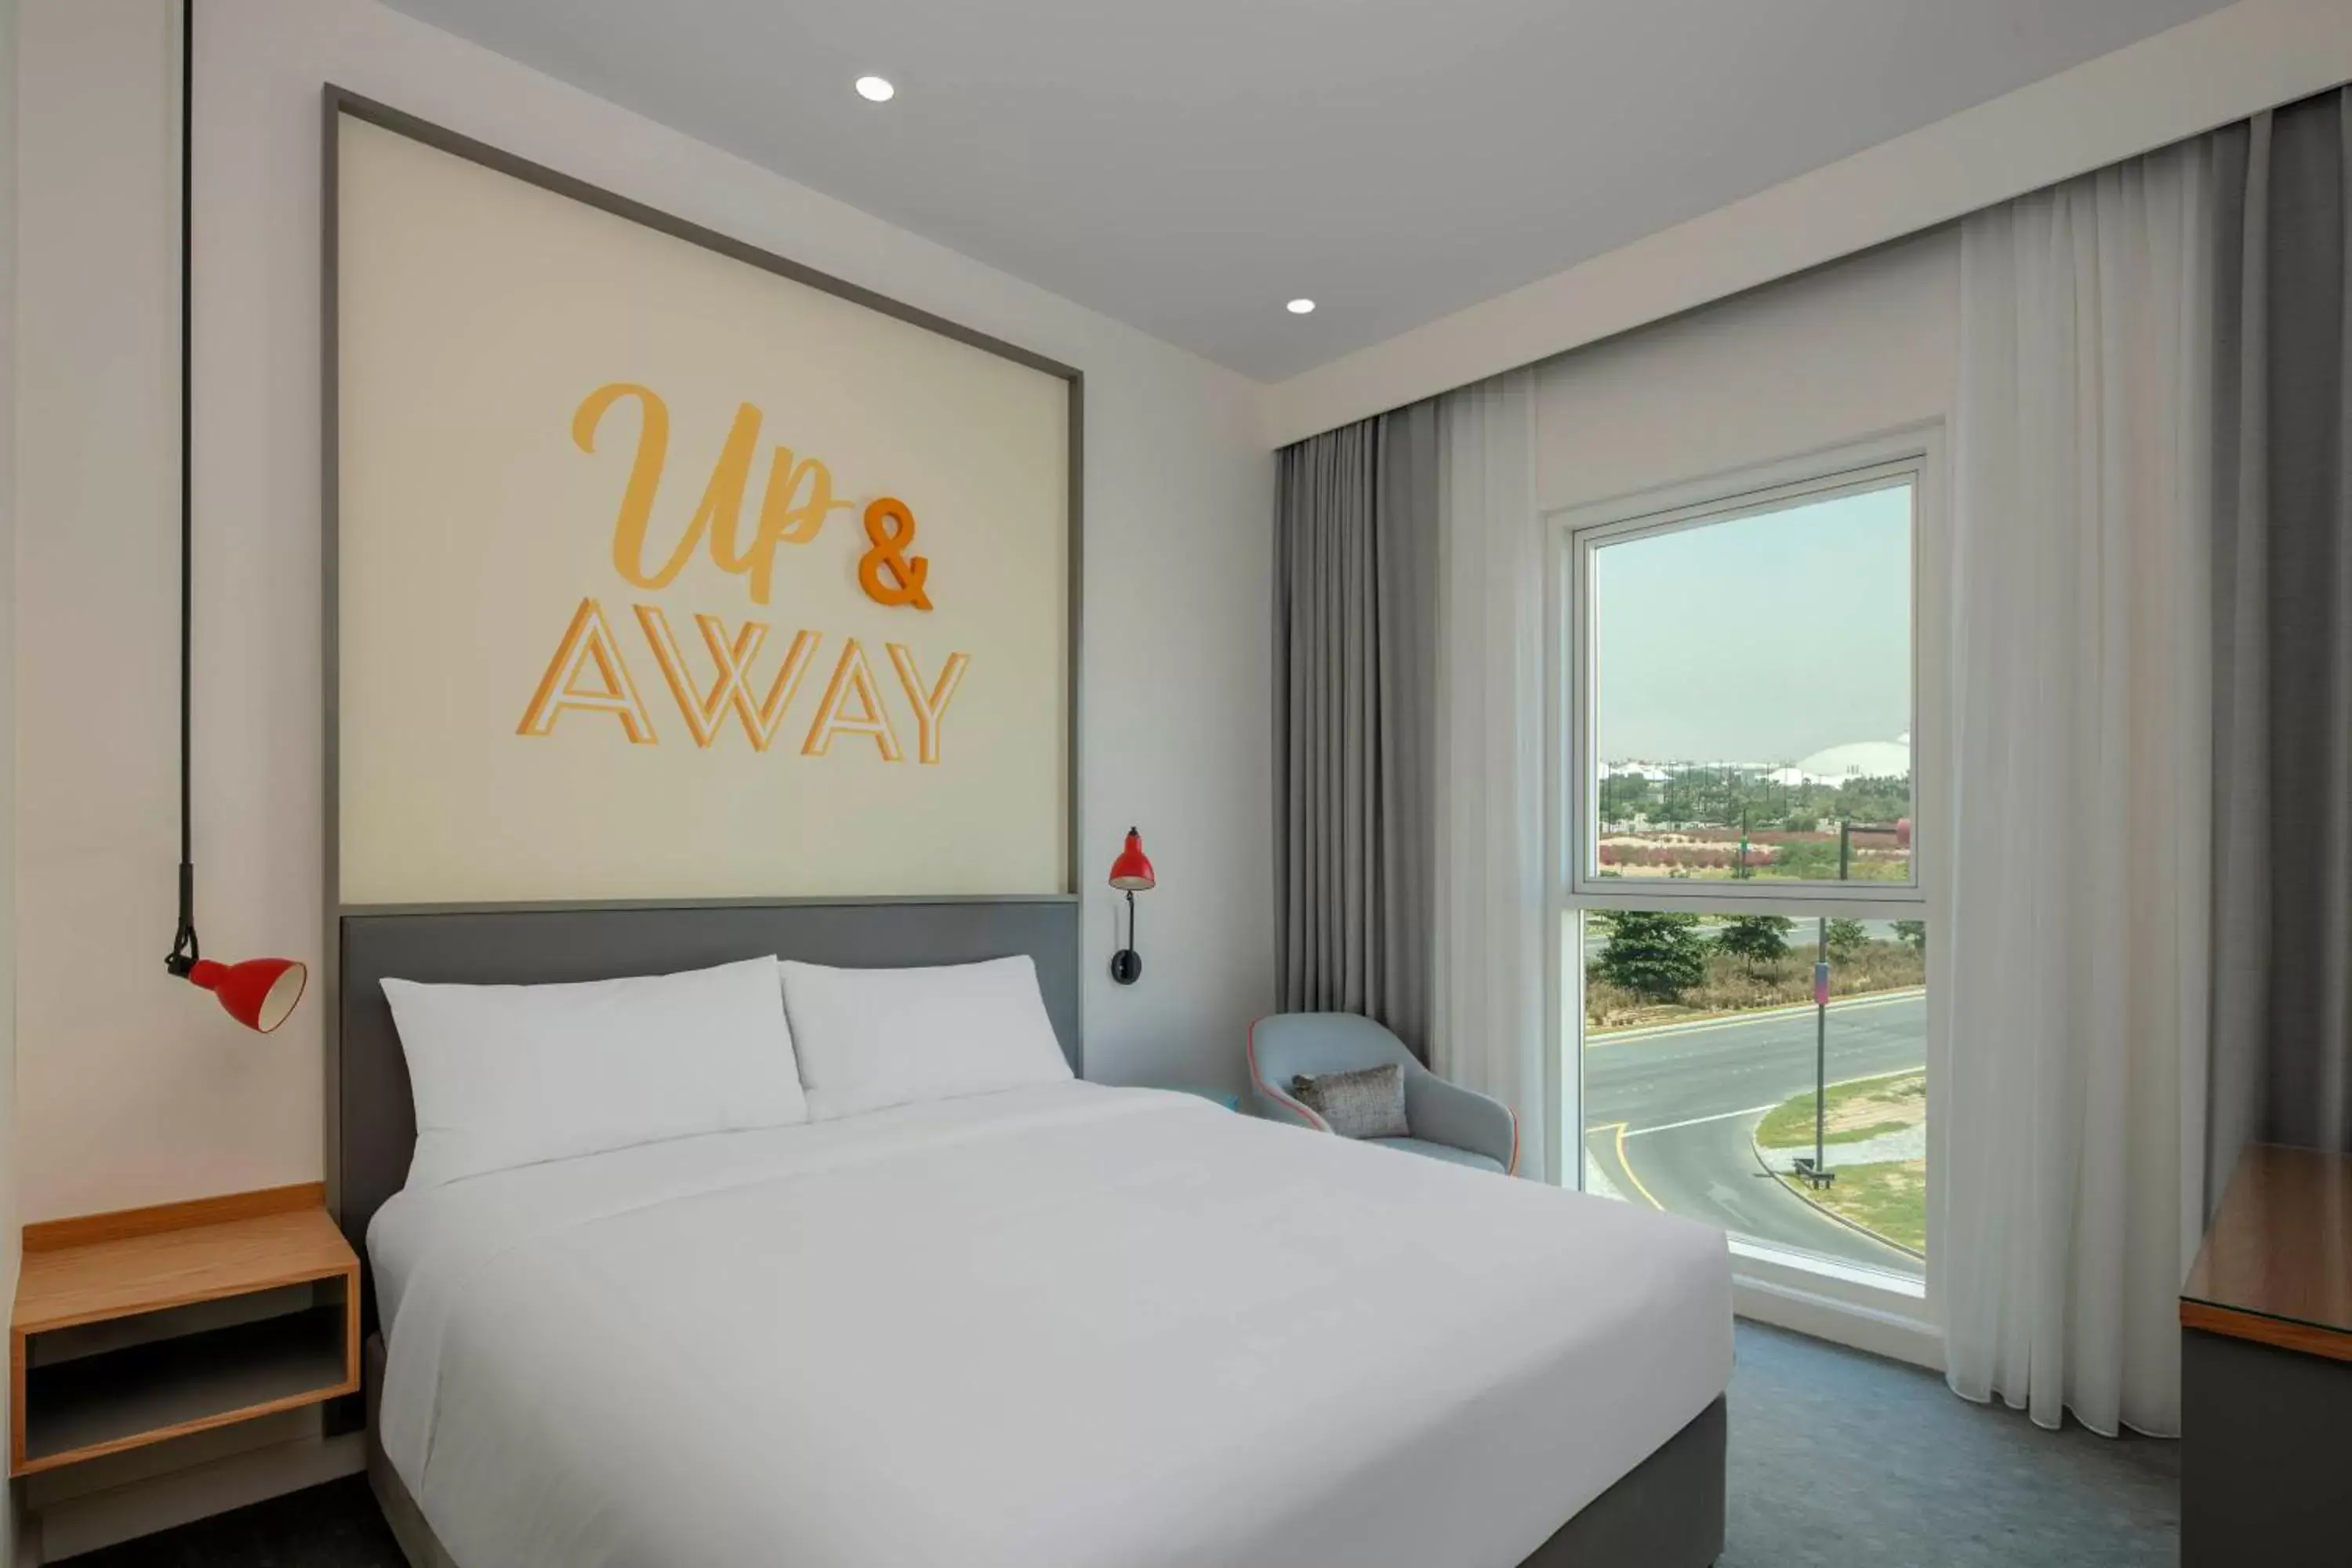 Rover Room Inclusive of Dubai Parks & Resorts Tickets - single occupancy in Rove At The Park